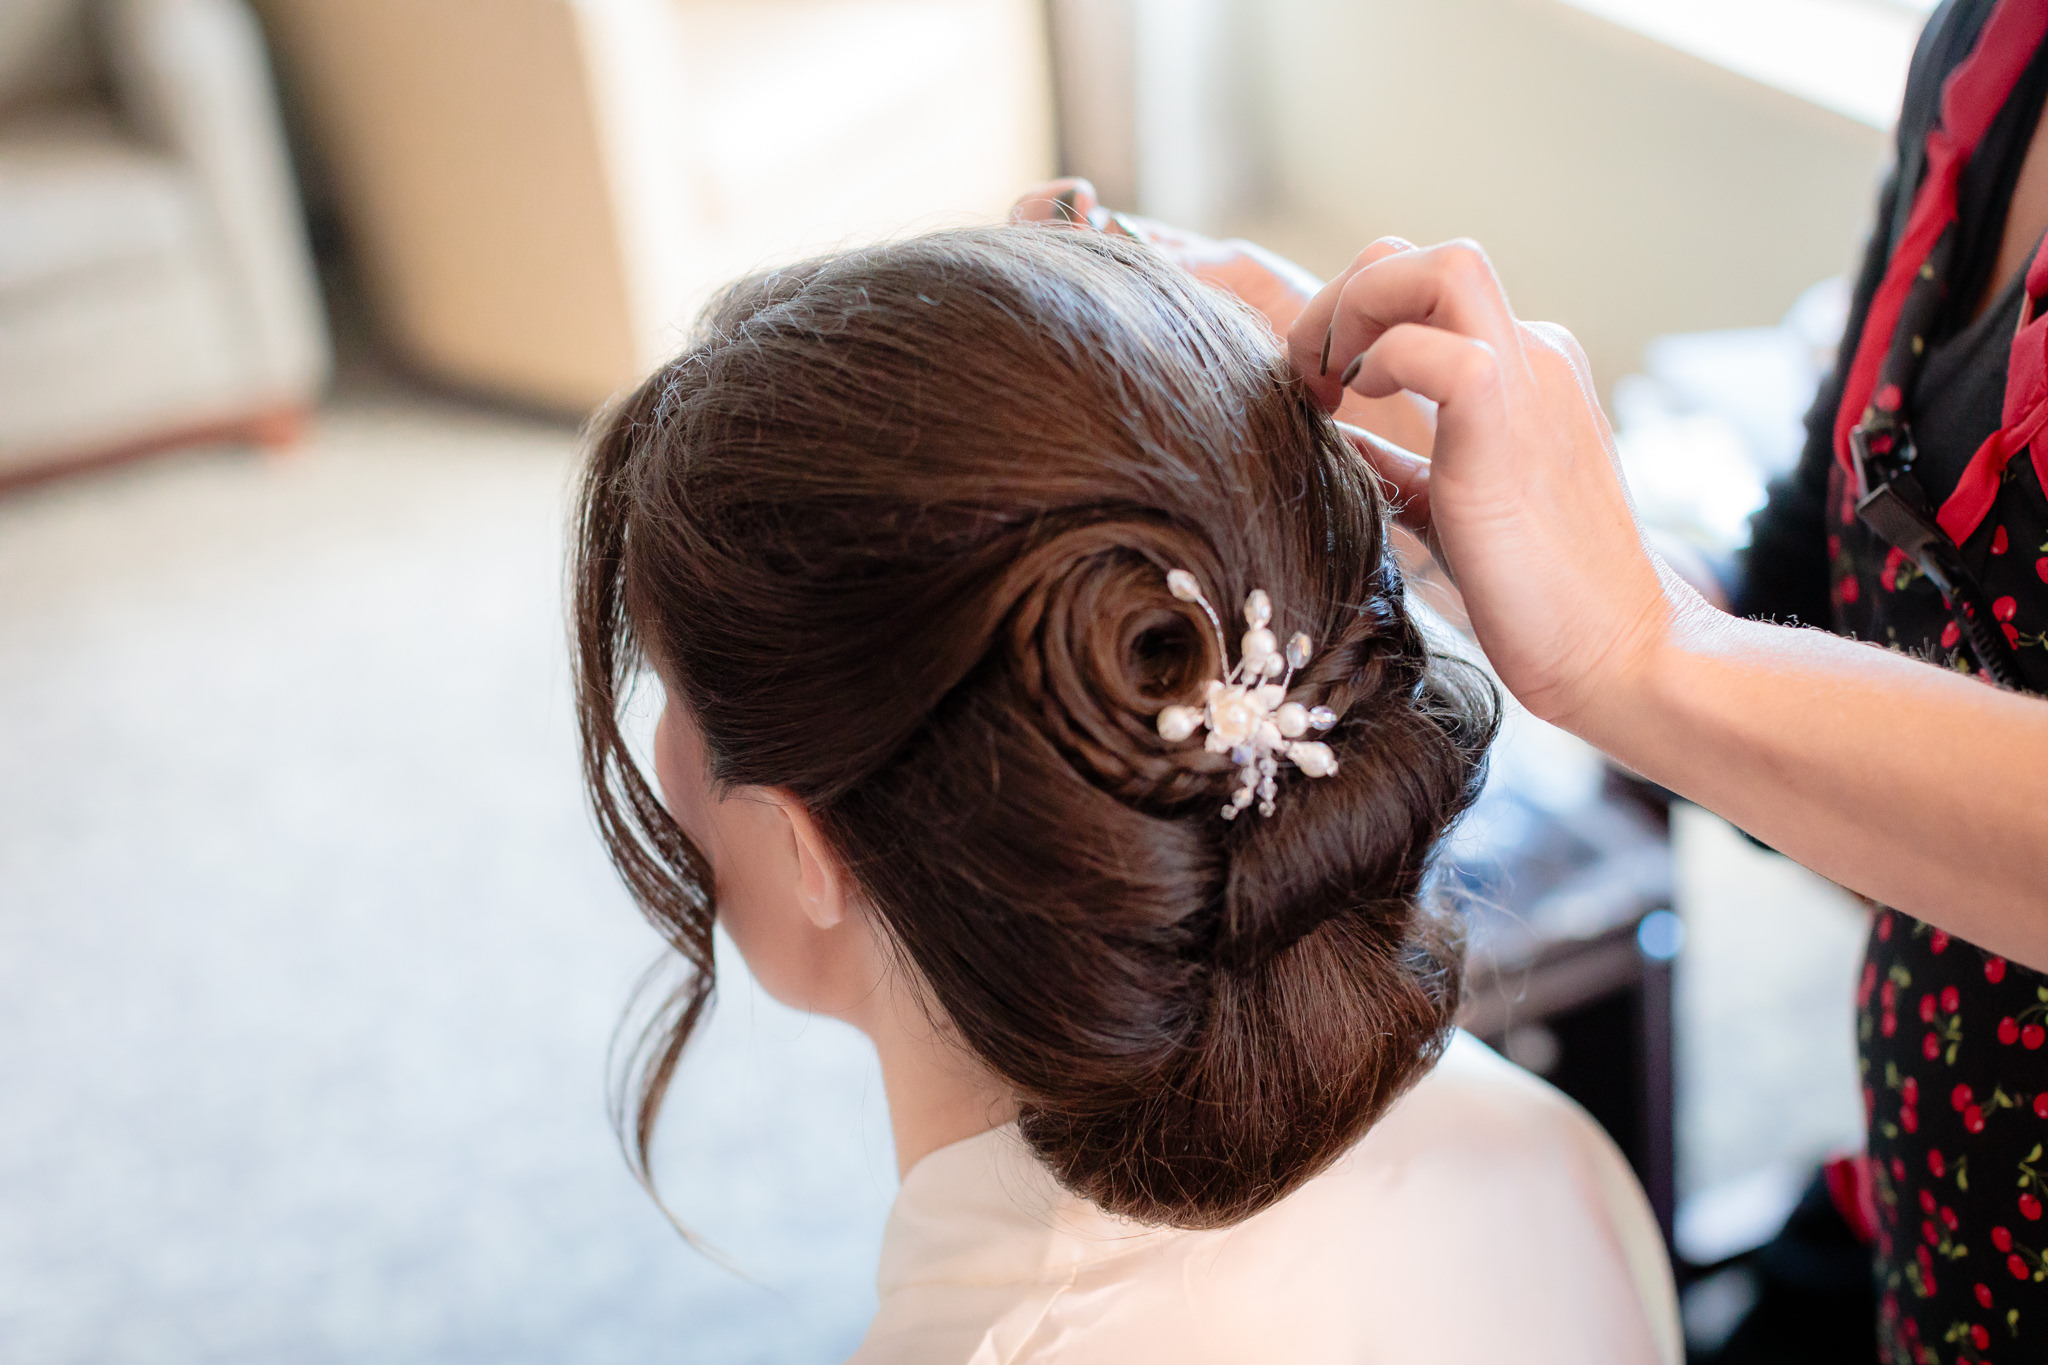 Hair stylist from Salon Nolas puts the finishing touch ups on the bride's updo